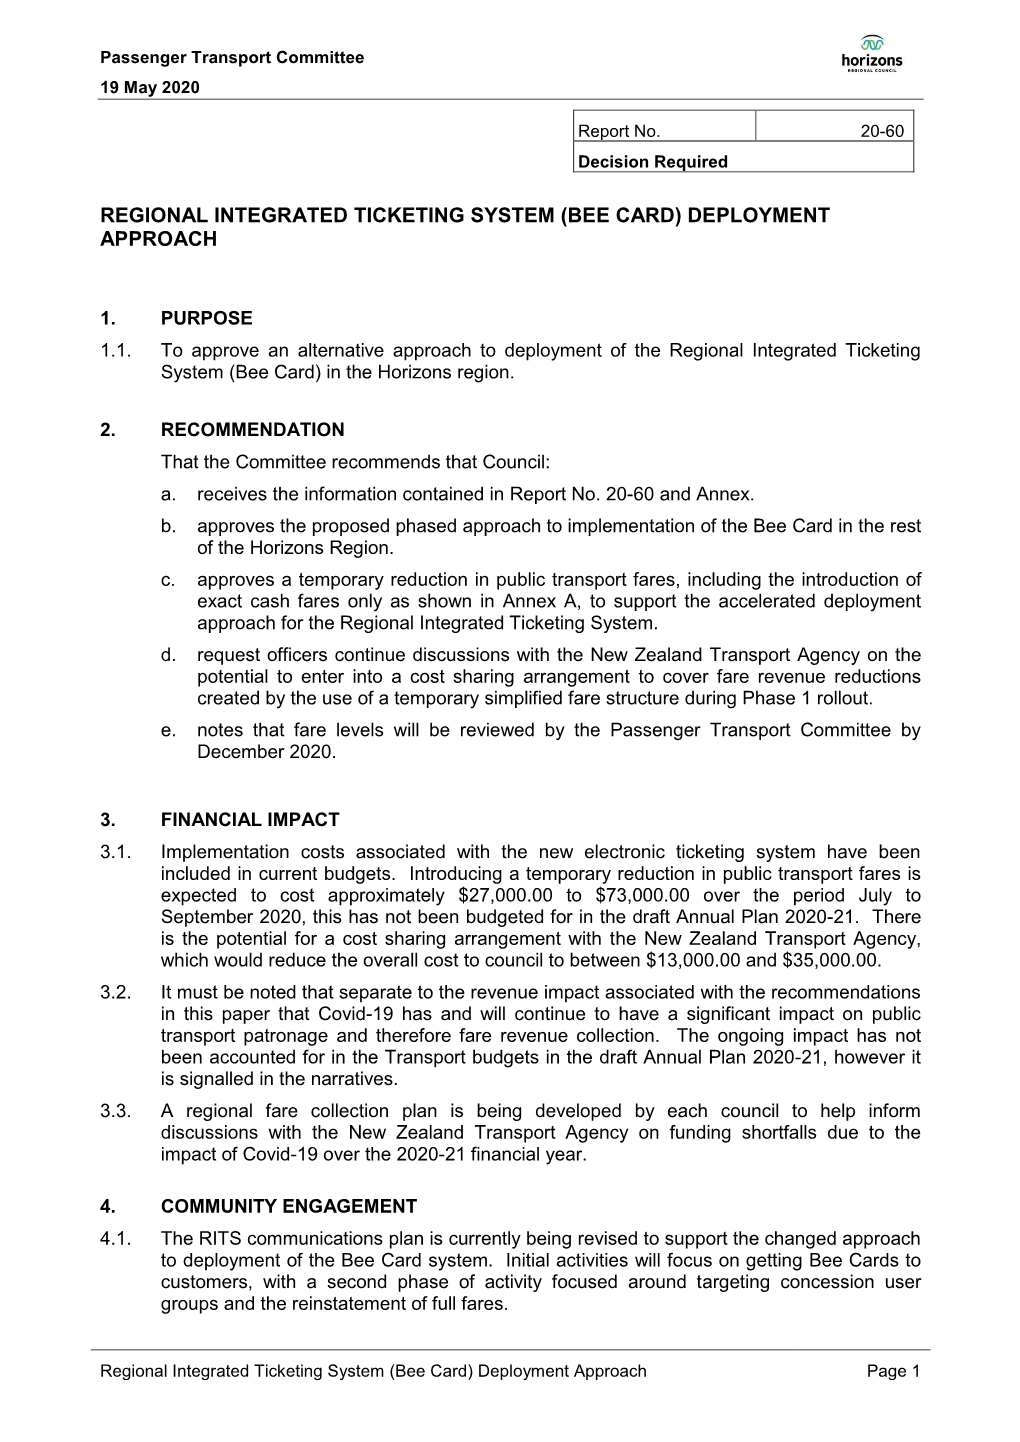 Passenger Transport Committee 19 May 2020